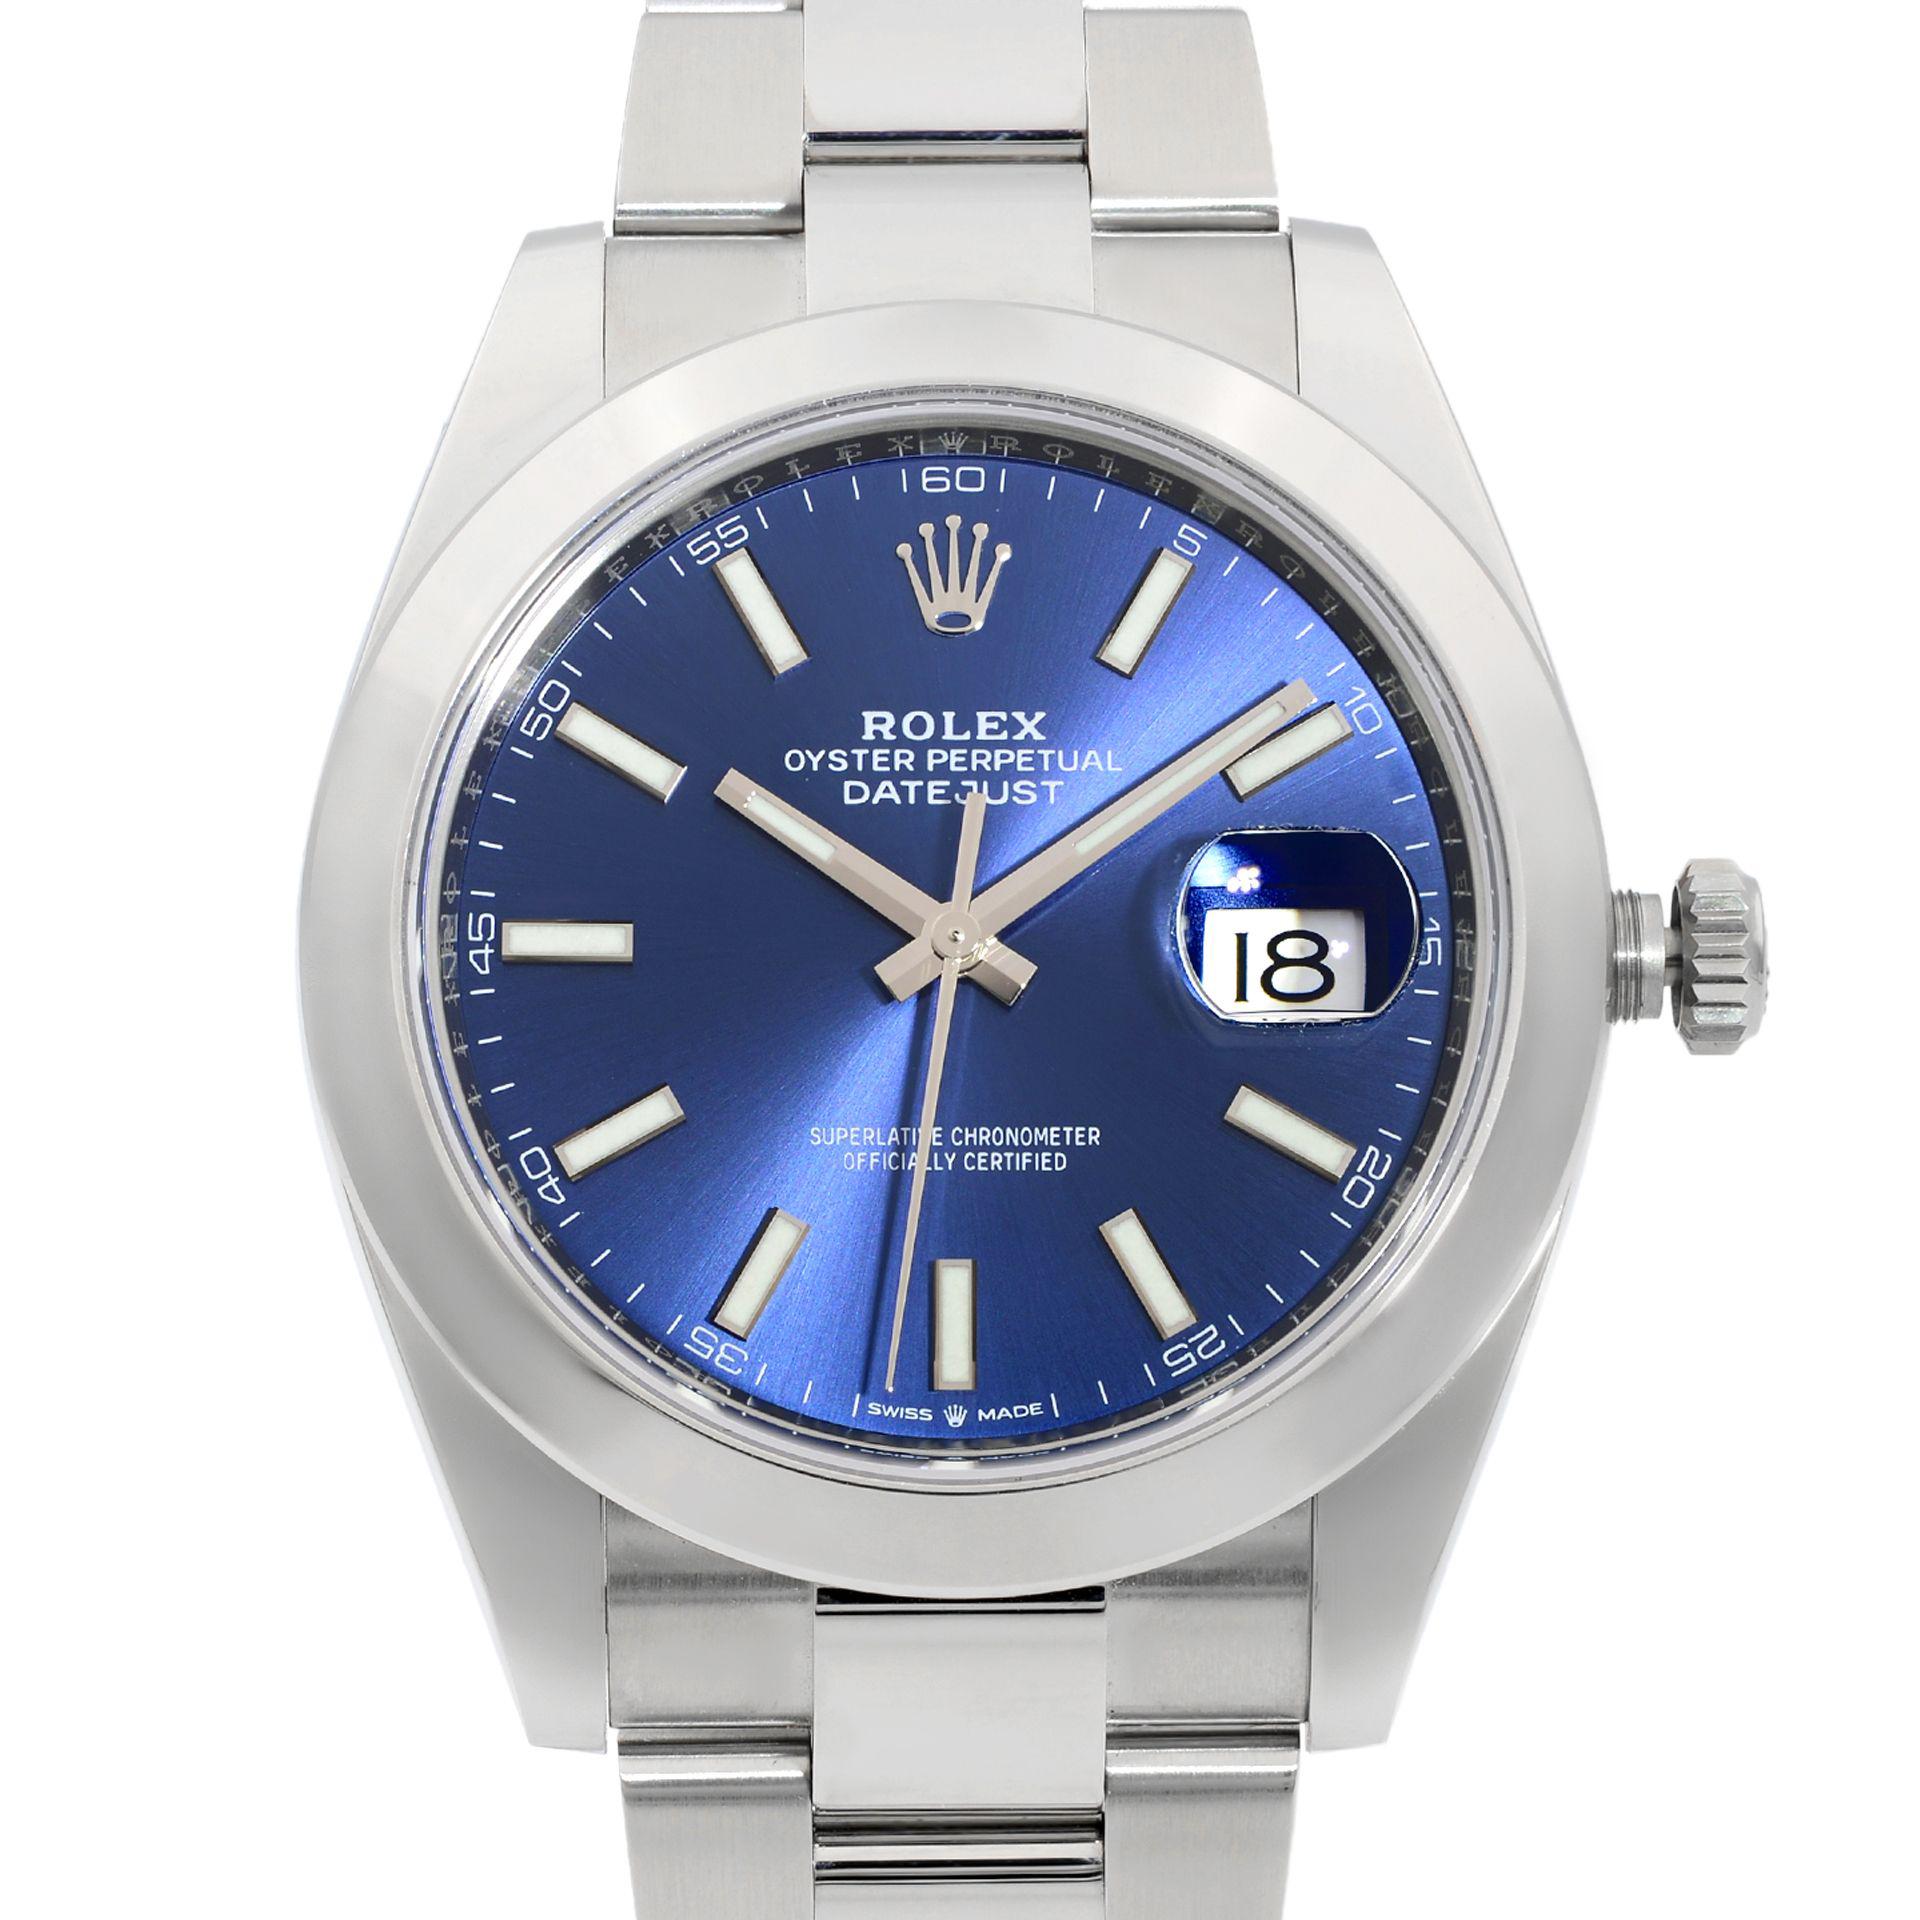 Pre-owned. Original Box and Papers are Included. Covered by 3-year 
Chronostore Warranty. 

Details:
Brand
Rolex
Department
Men
Model Number
126300
Country/Region of Manufacture
Switzerland
Model
Rolex Datejust 126300
Style
Dress/Formal,